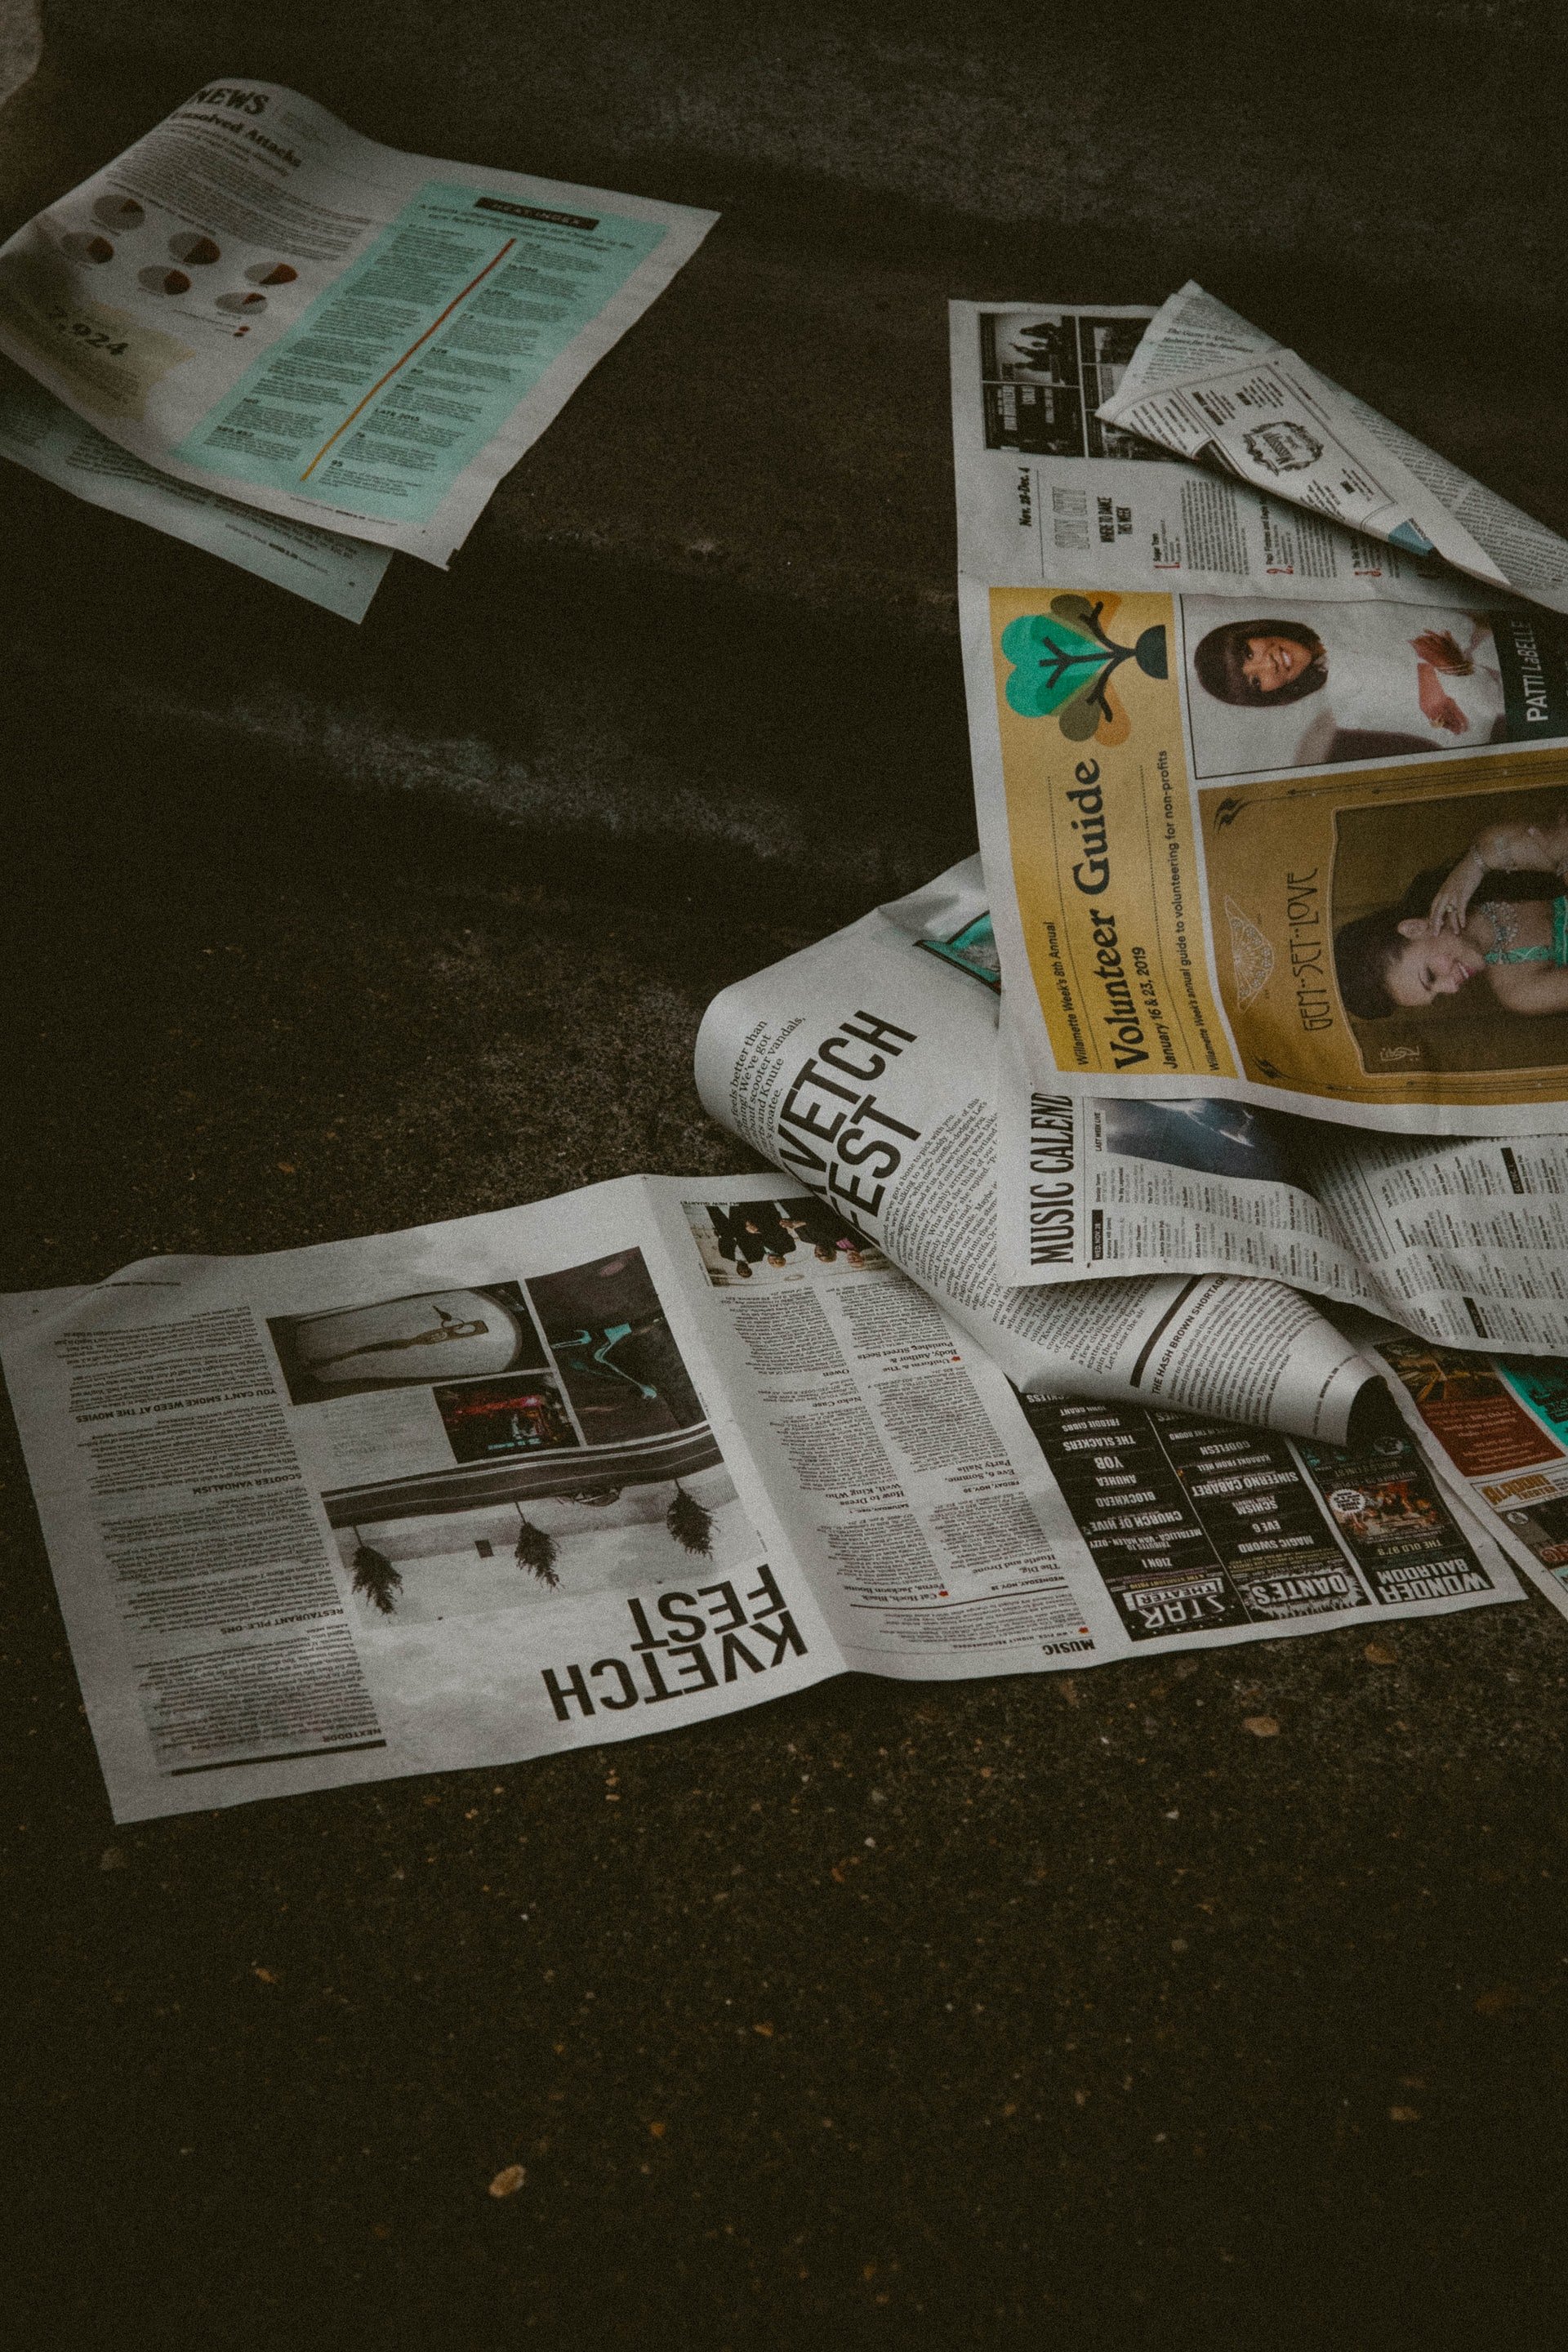 They found old newspaper clippings. | Source: Unsplash